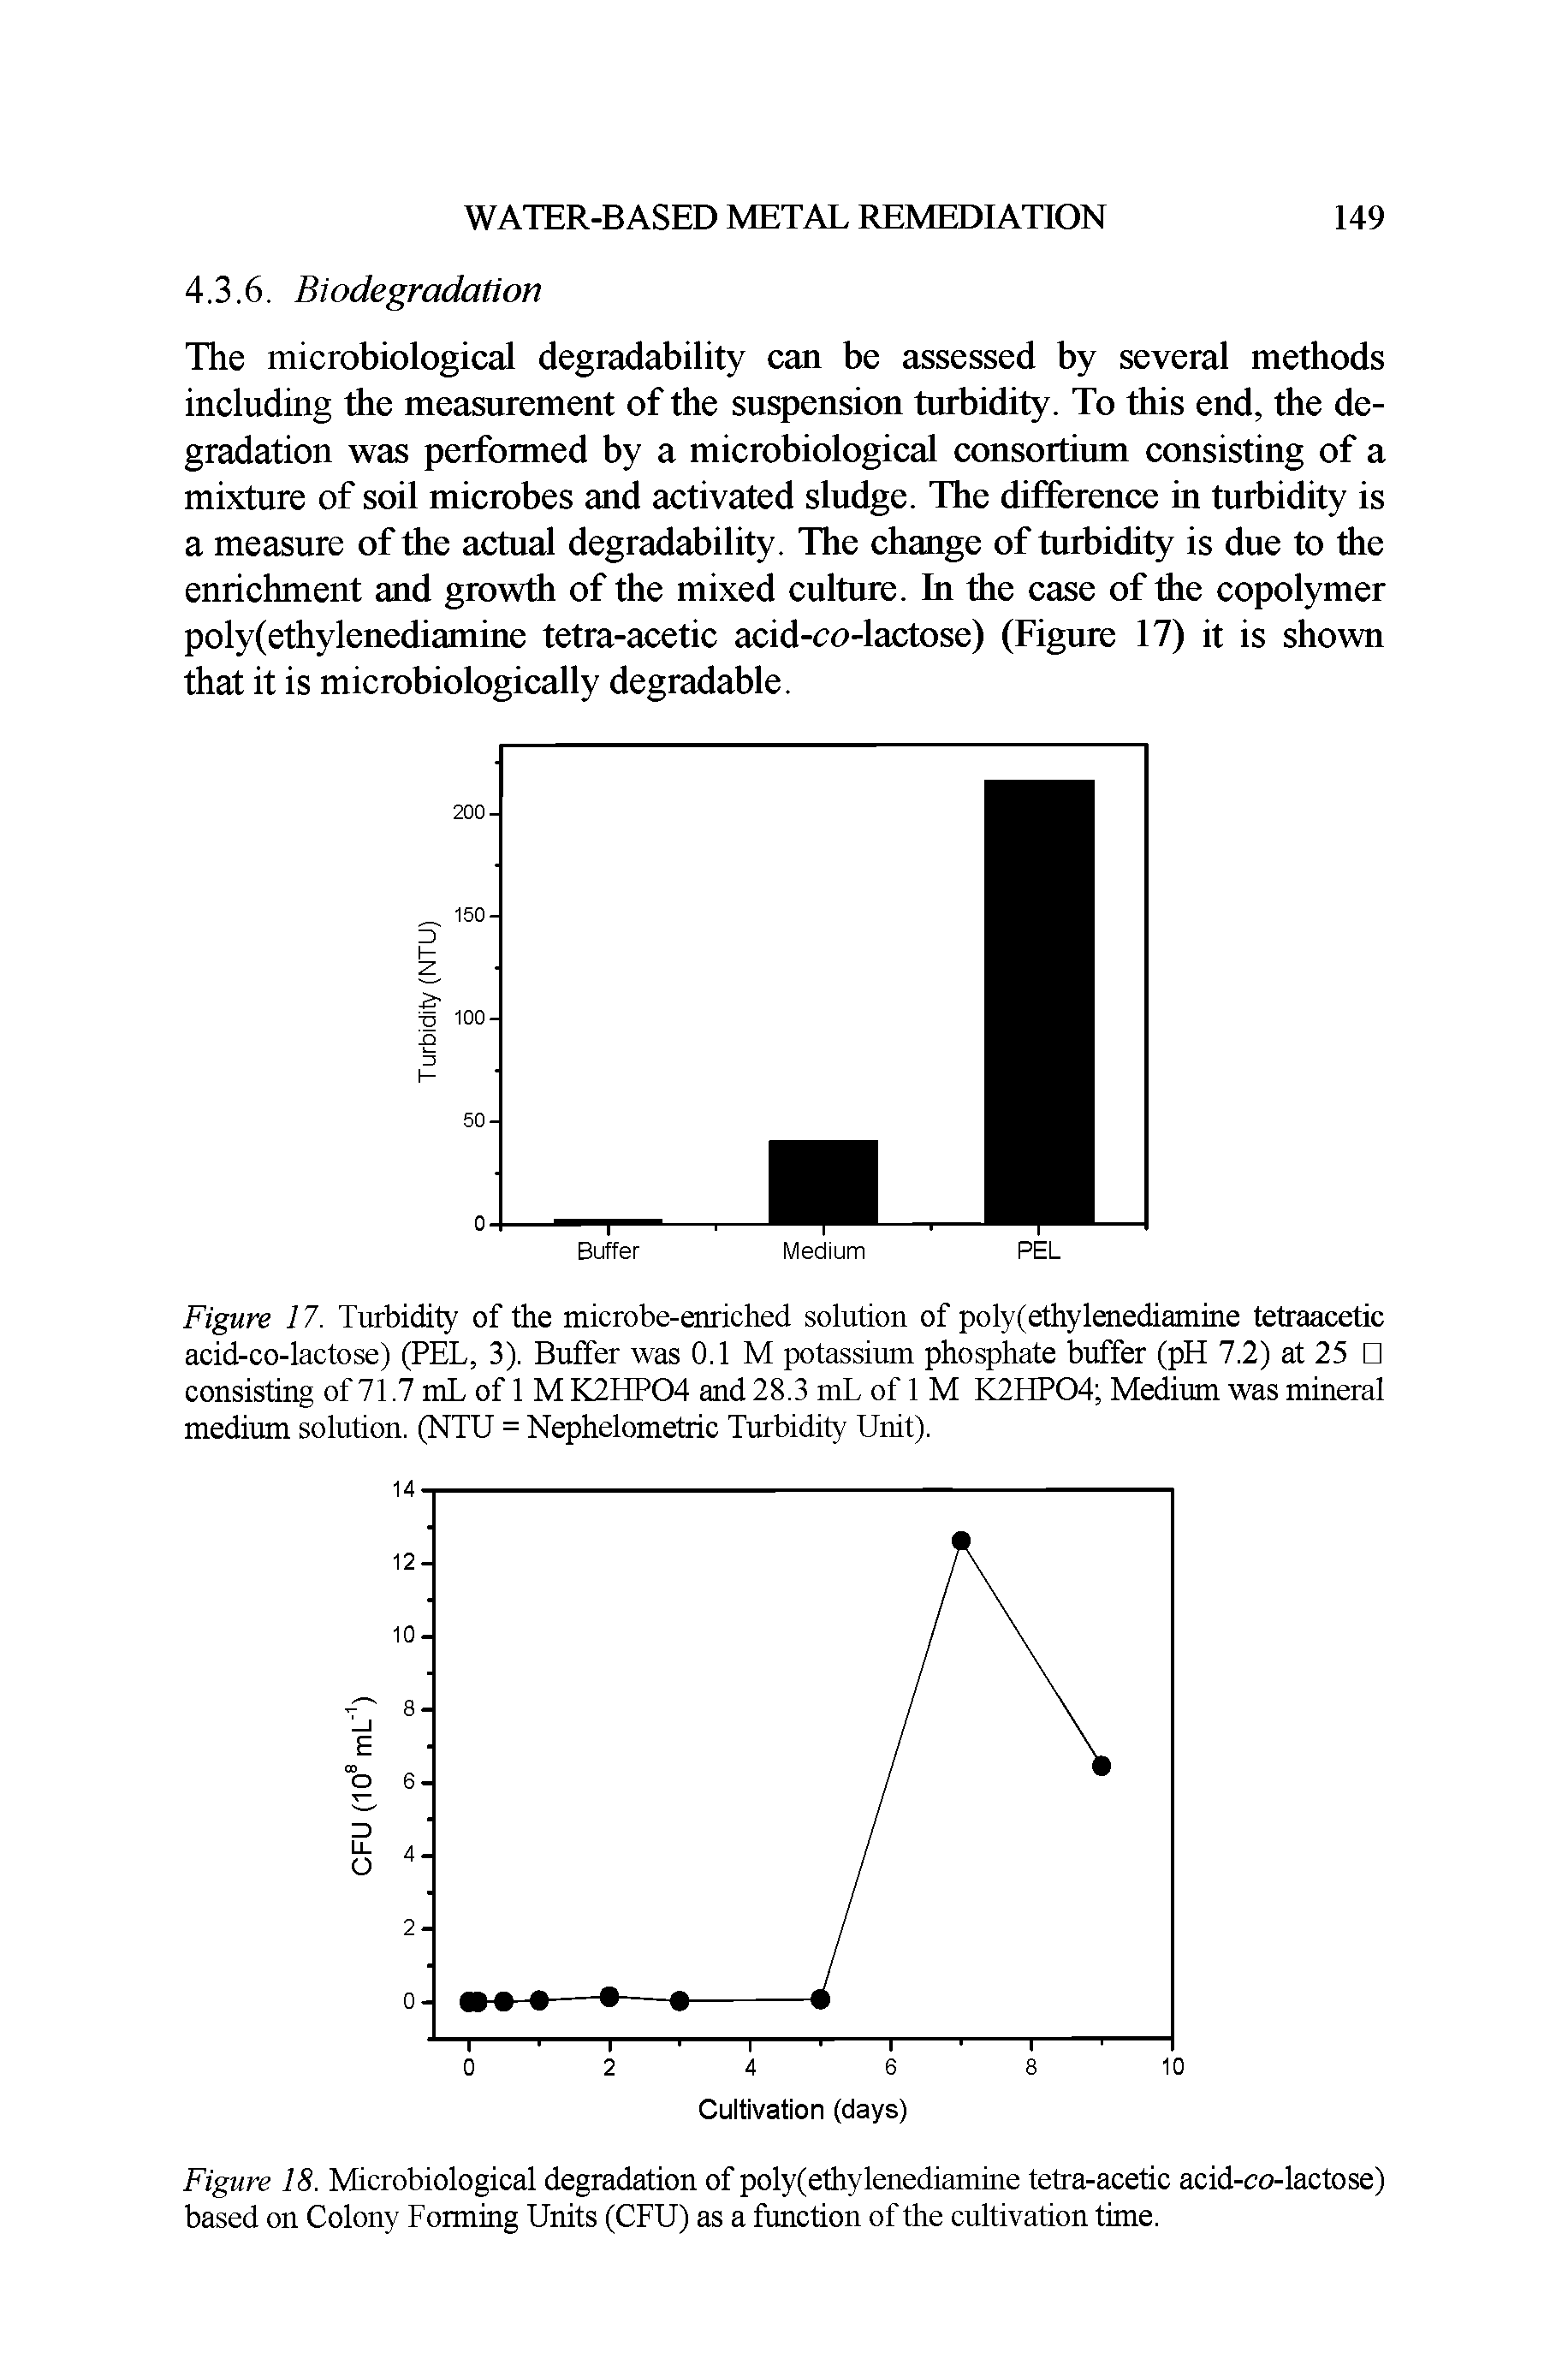 Figure 17. Turbidity of the microbe-enriched solution of pohl ethyienediamine tetraacetic acid-co-lactose) (PEL, 3). Buffer was 0.1 M potassium phosphate buffer (pH 7.2) at 25 consisting of 71.7 mL of 1 M K2HPO4 and 28.3 mL of I M K211PO4 Medium was mineral medium solution. (NTU = Nephelometric Turbidity Unit).